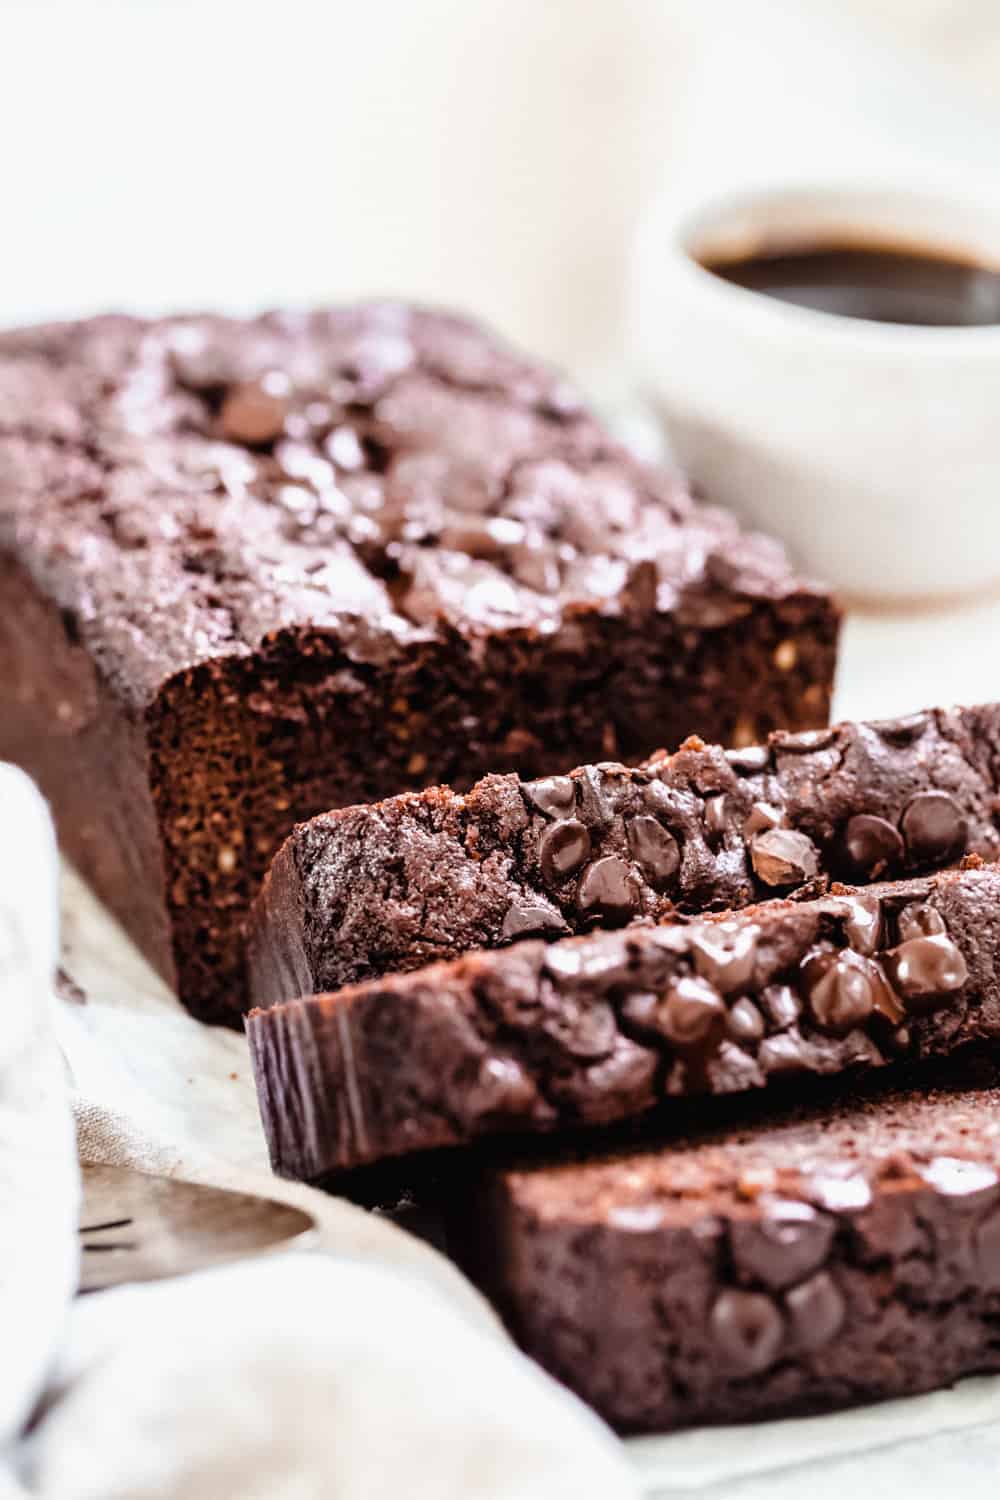 This super decadent paleo chocolate zucchini bread is so moist and the perfect breakfast, dessert or on-the-go snack for you. This zucchini bread is gluten free, dairy free and refined sugar free. #paleo #zucchinibread #glutenfree #chocolate